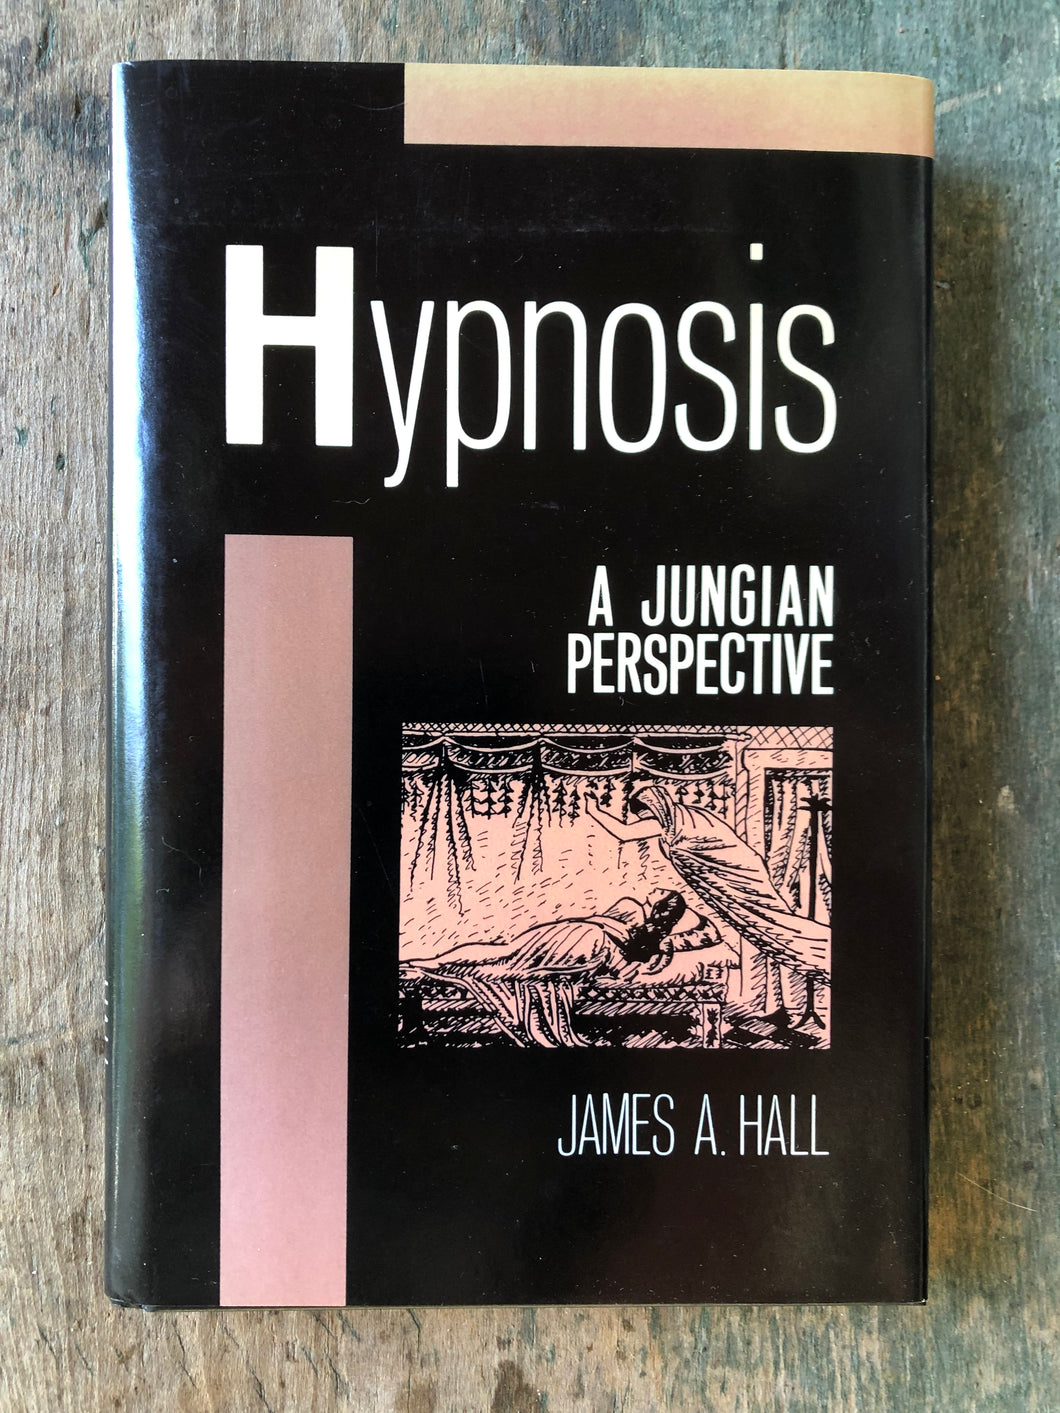 Hypnosis: A Jungian Perspective. by James A. Hall